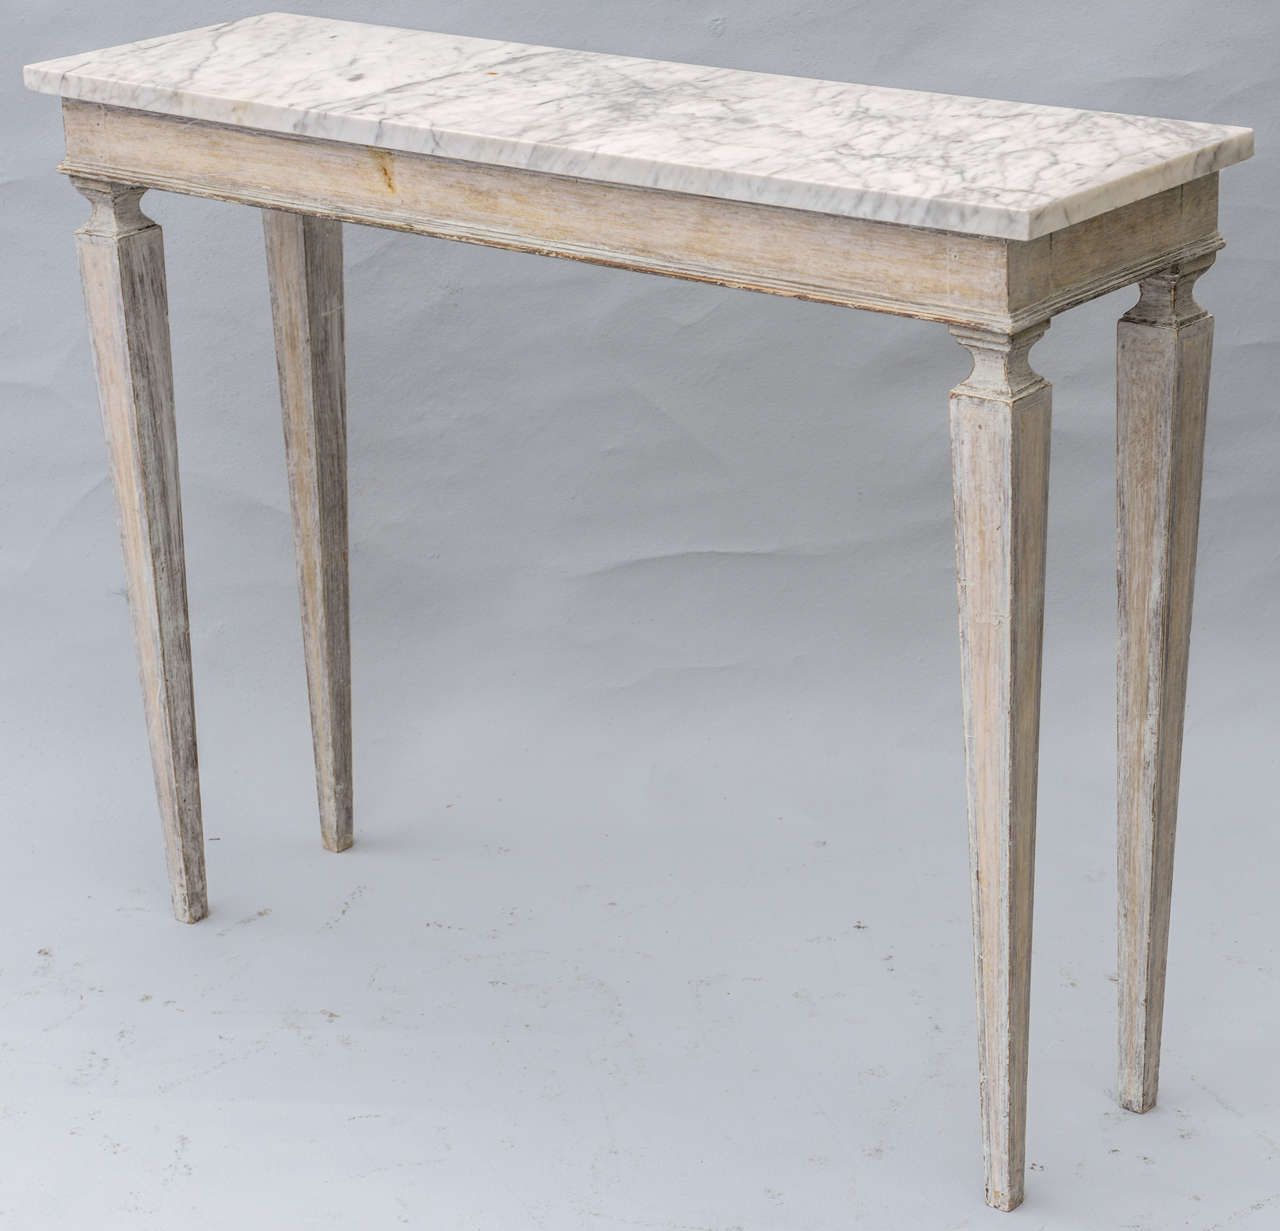 Pair Of Narrow Painted Console Tables With Marble Tops At 1stdibs Within Marble And White Console Tables (View 10 of 20)